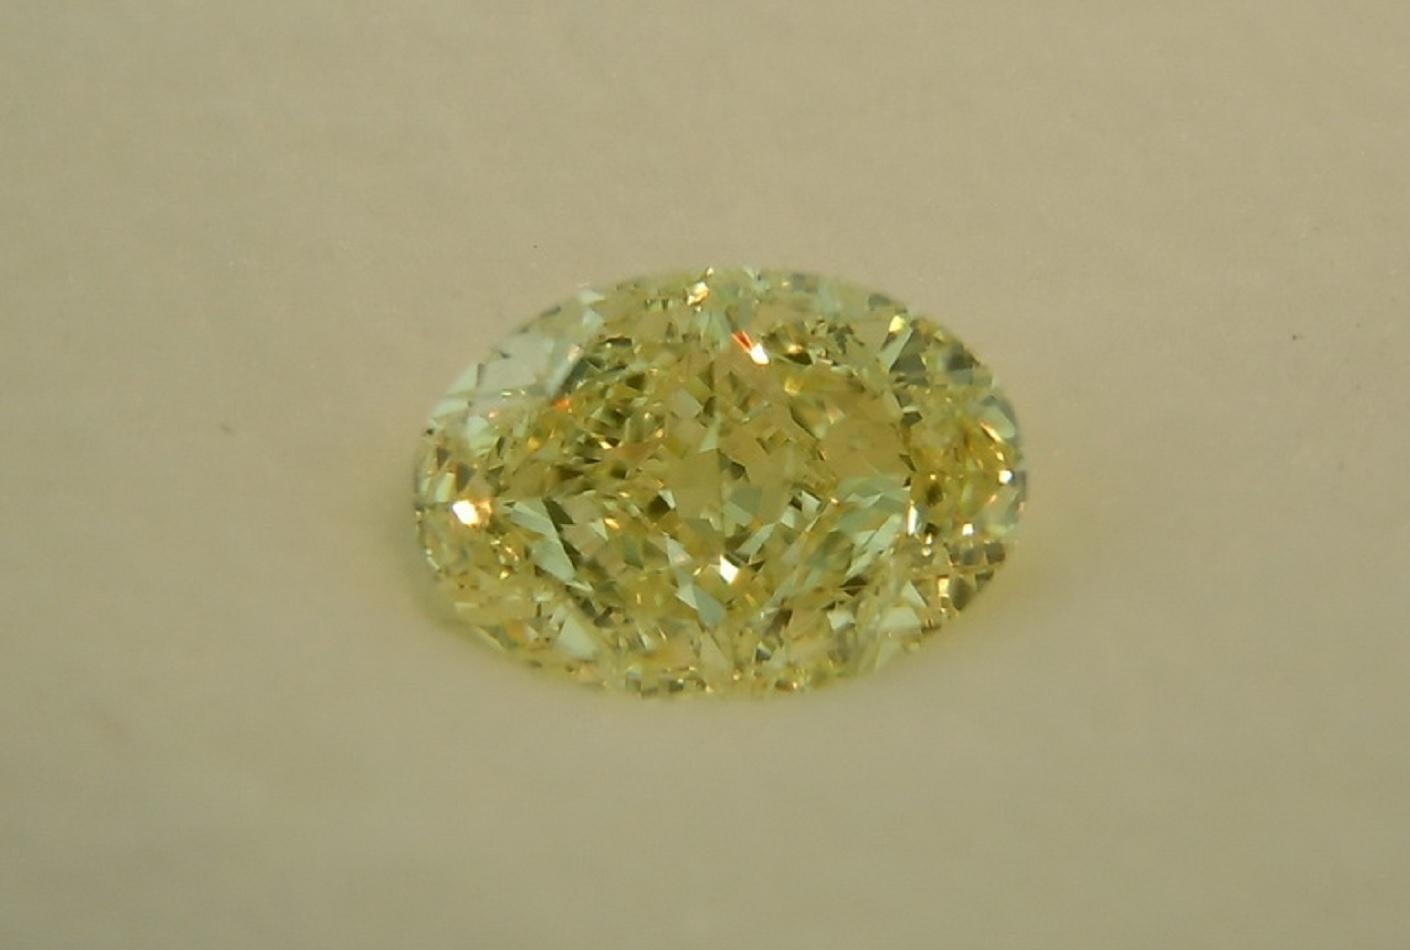 Gia Certified Classic Ring features an 1.41 carat Fancy Light Yellow Oval Diamond with GIA certificate see picture for details of the stone). The center diamond is accompanied by two white trillion  cut diamonds.The mounting is  18 karat white and